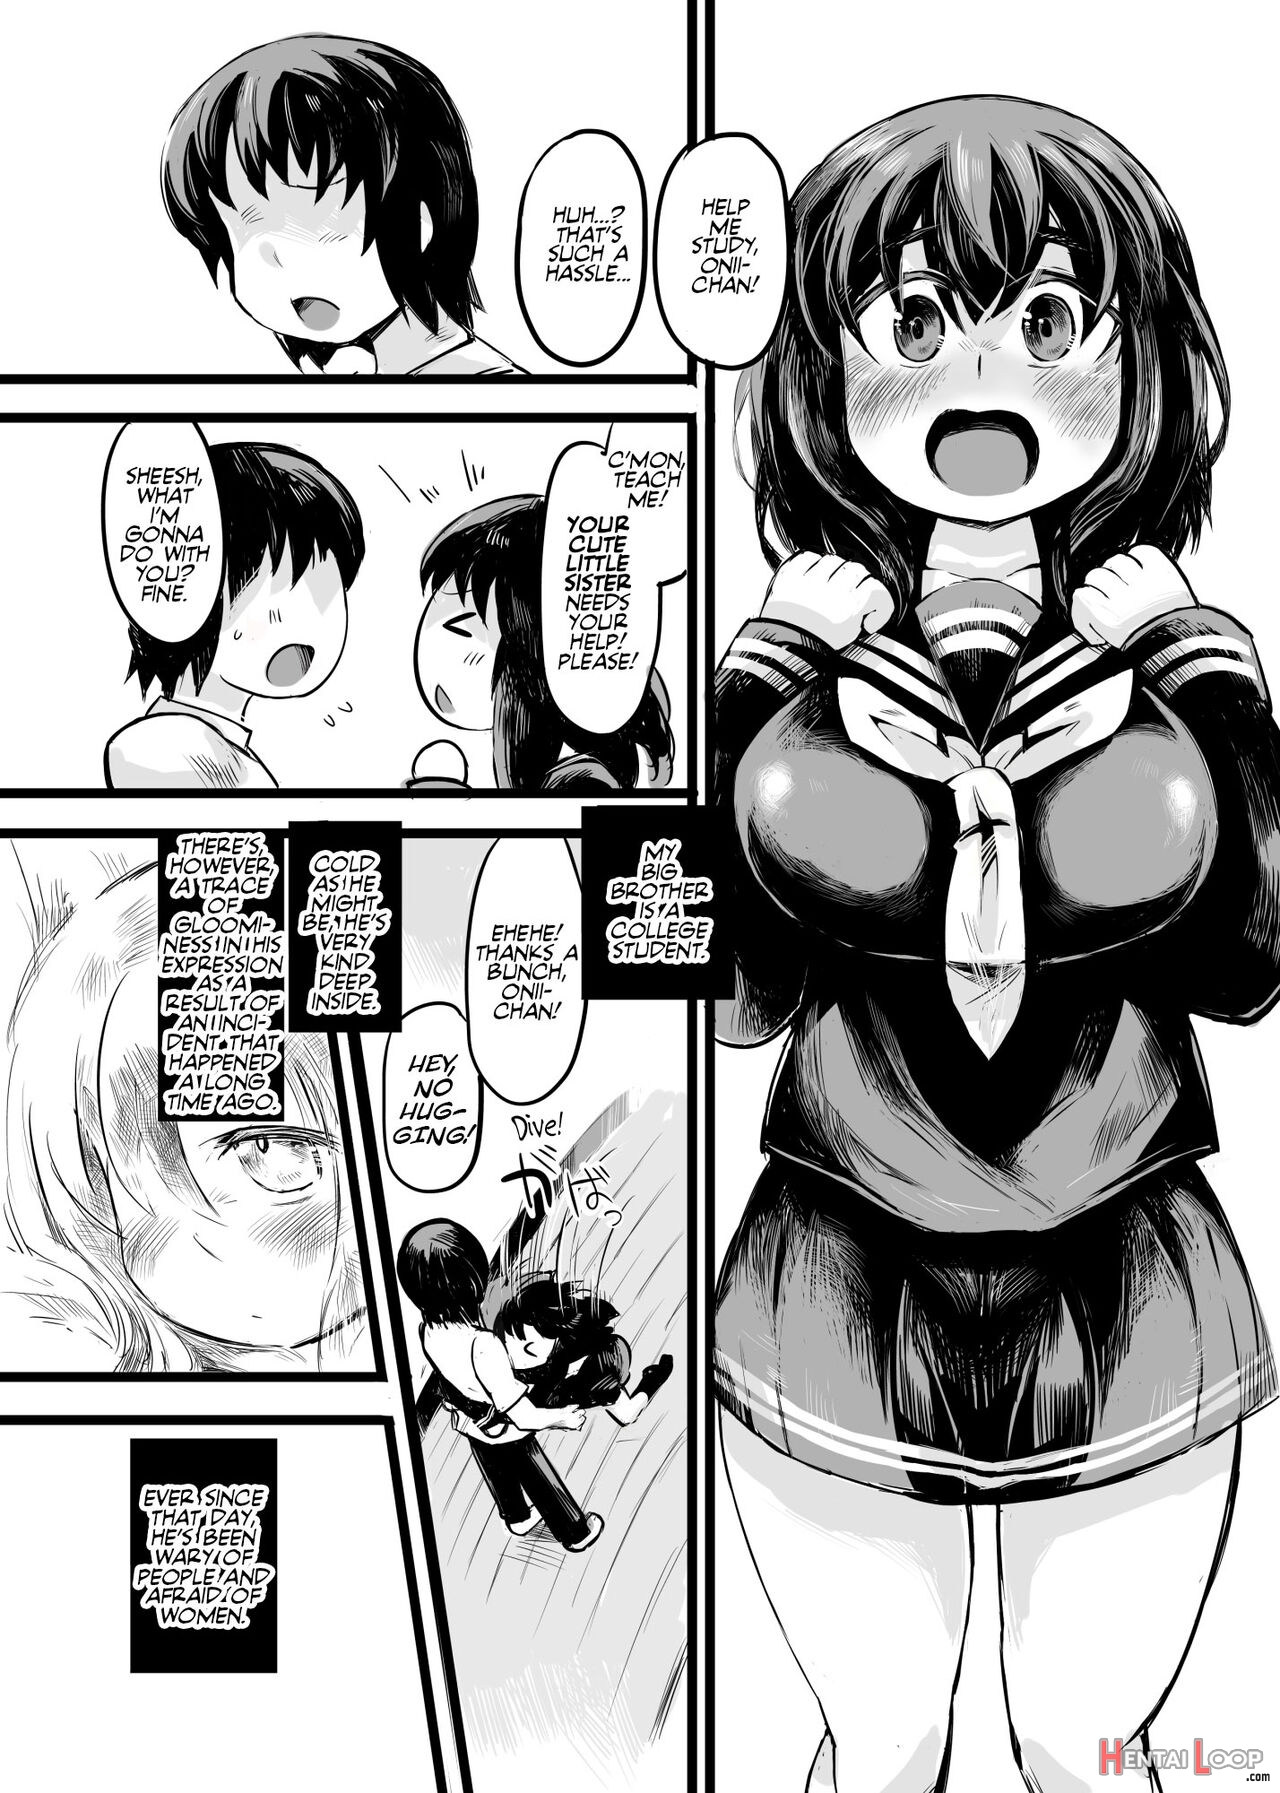 Fixing Onii-chan's Fear Of Women! page 4